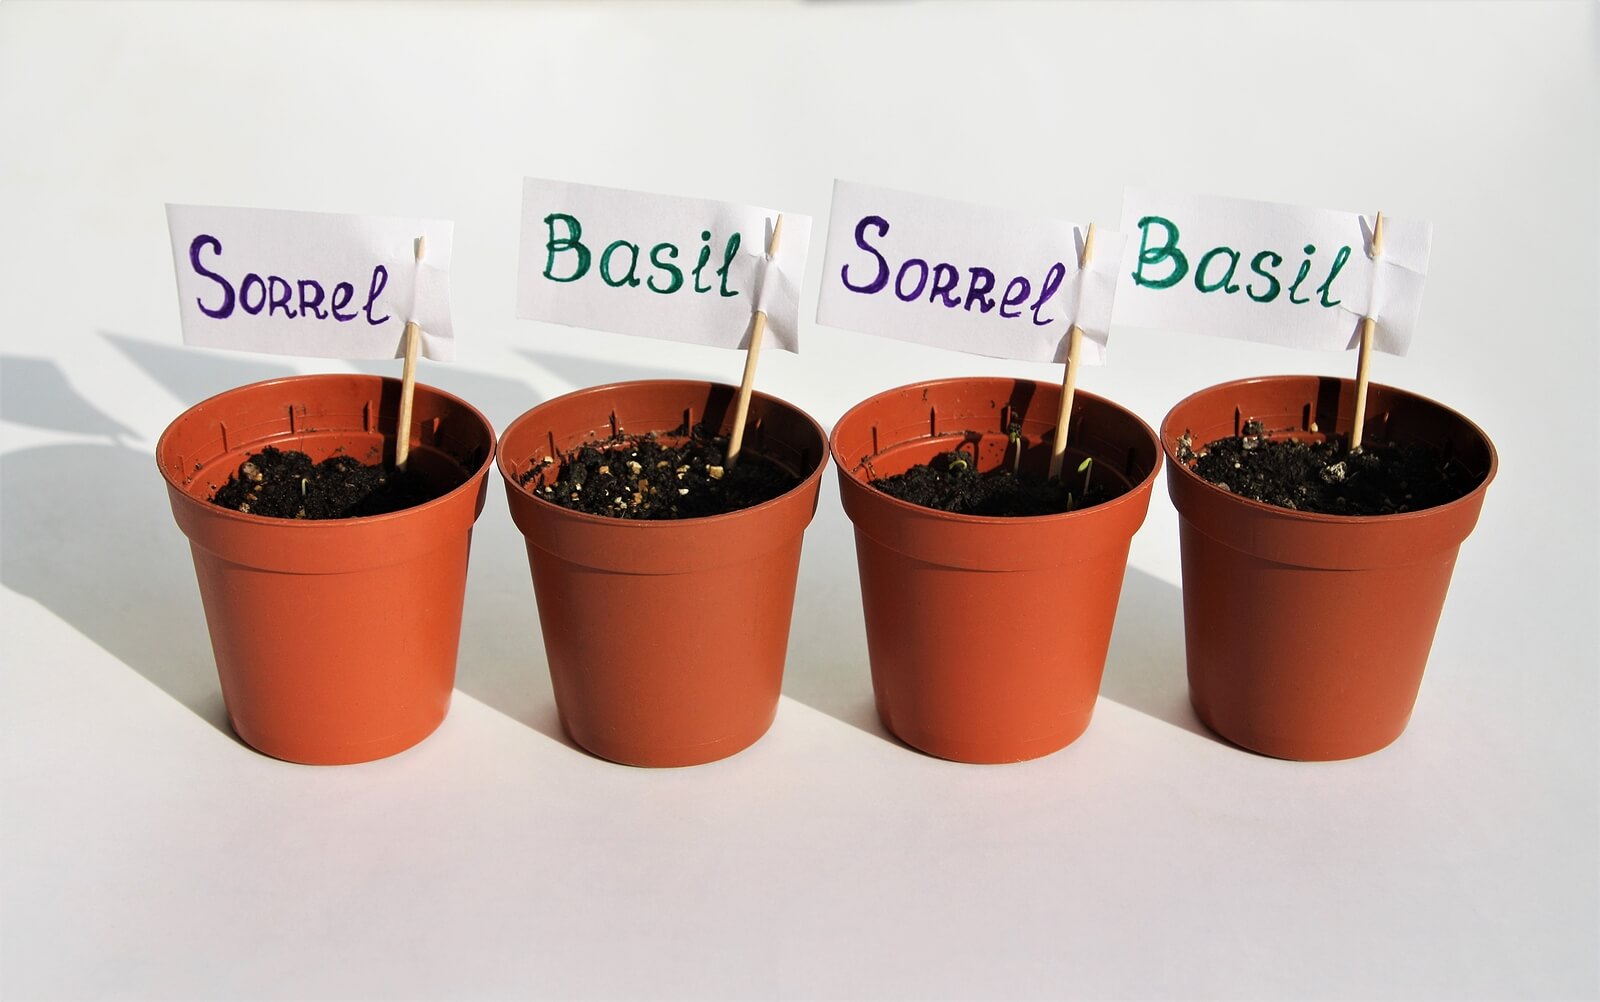 seed pots for germination with Basil and sorrel labels